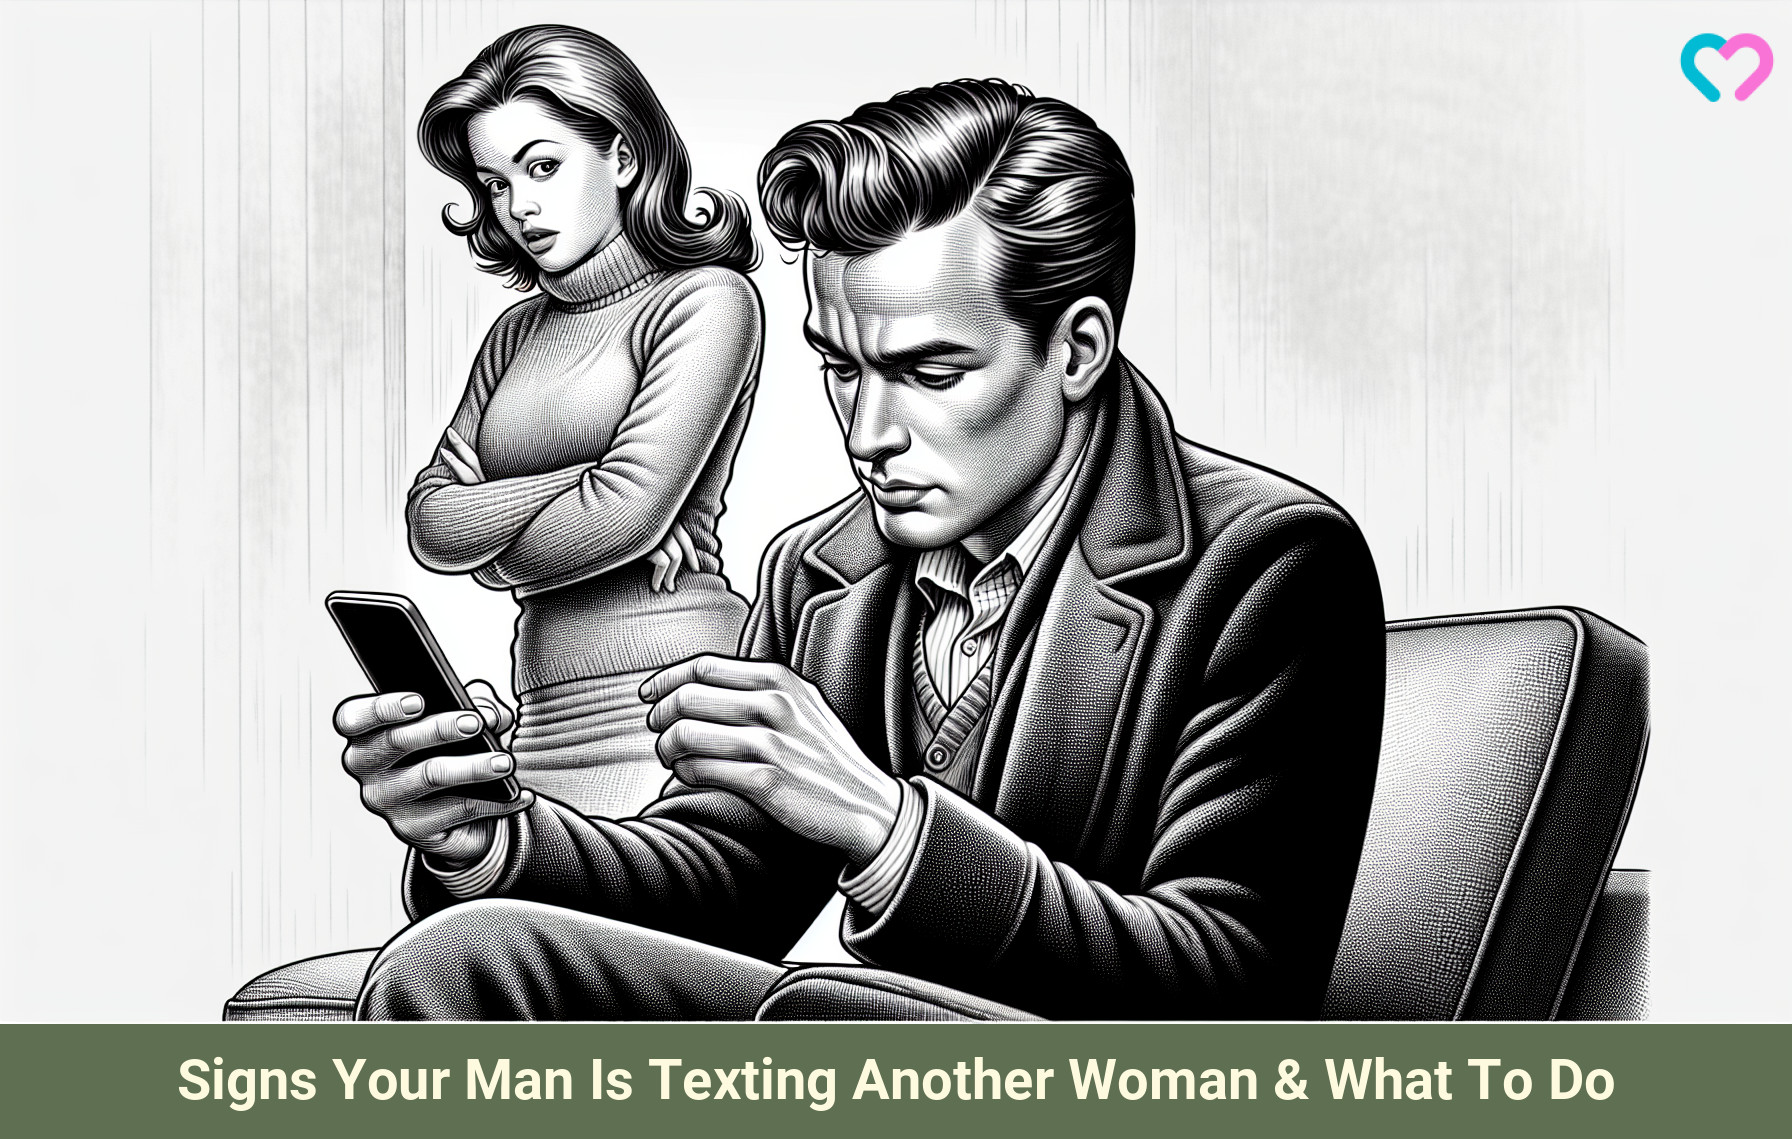 signs your man is texting another woman_illustration